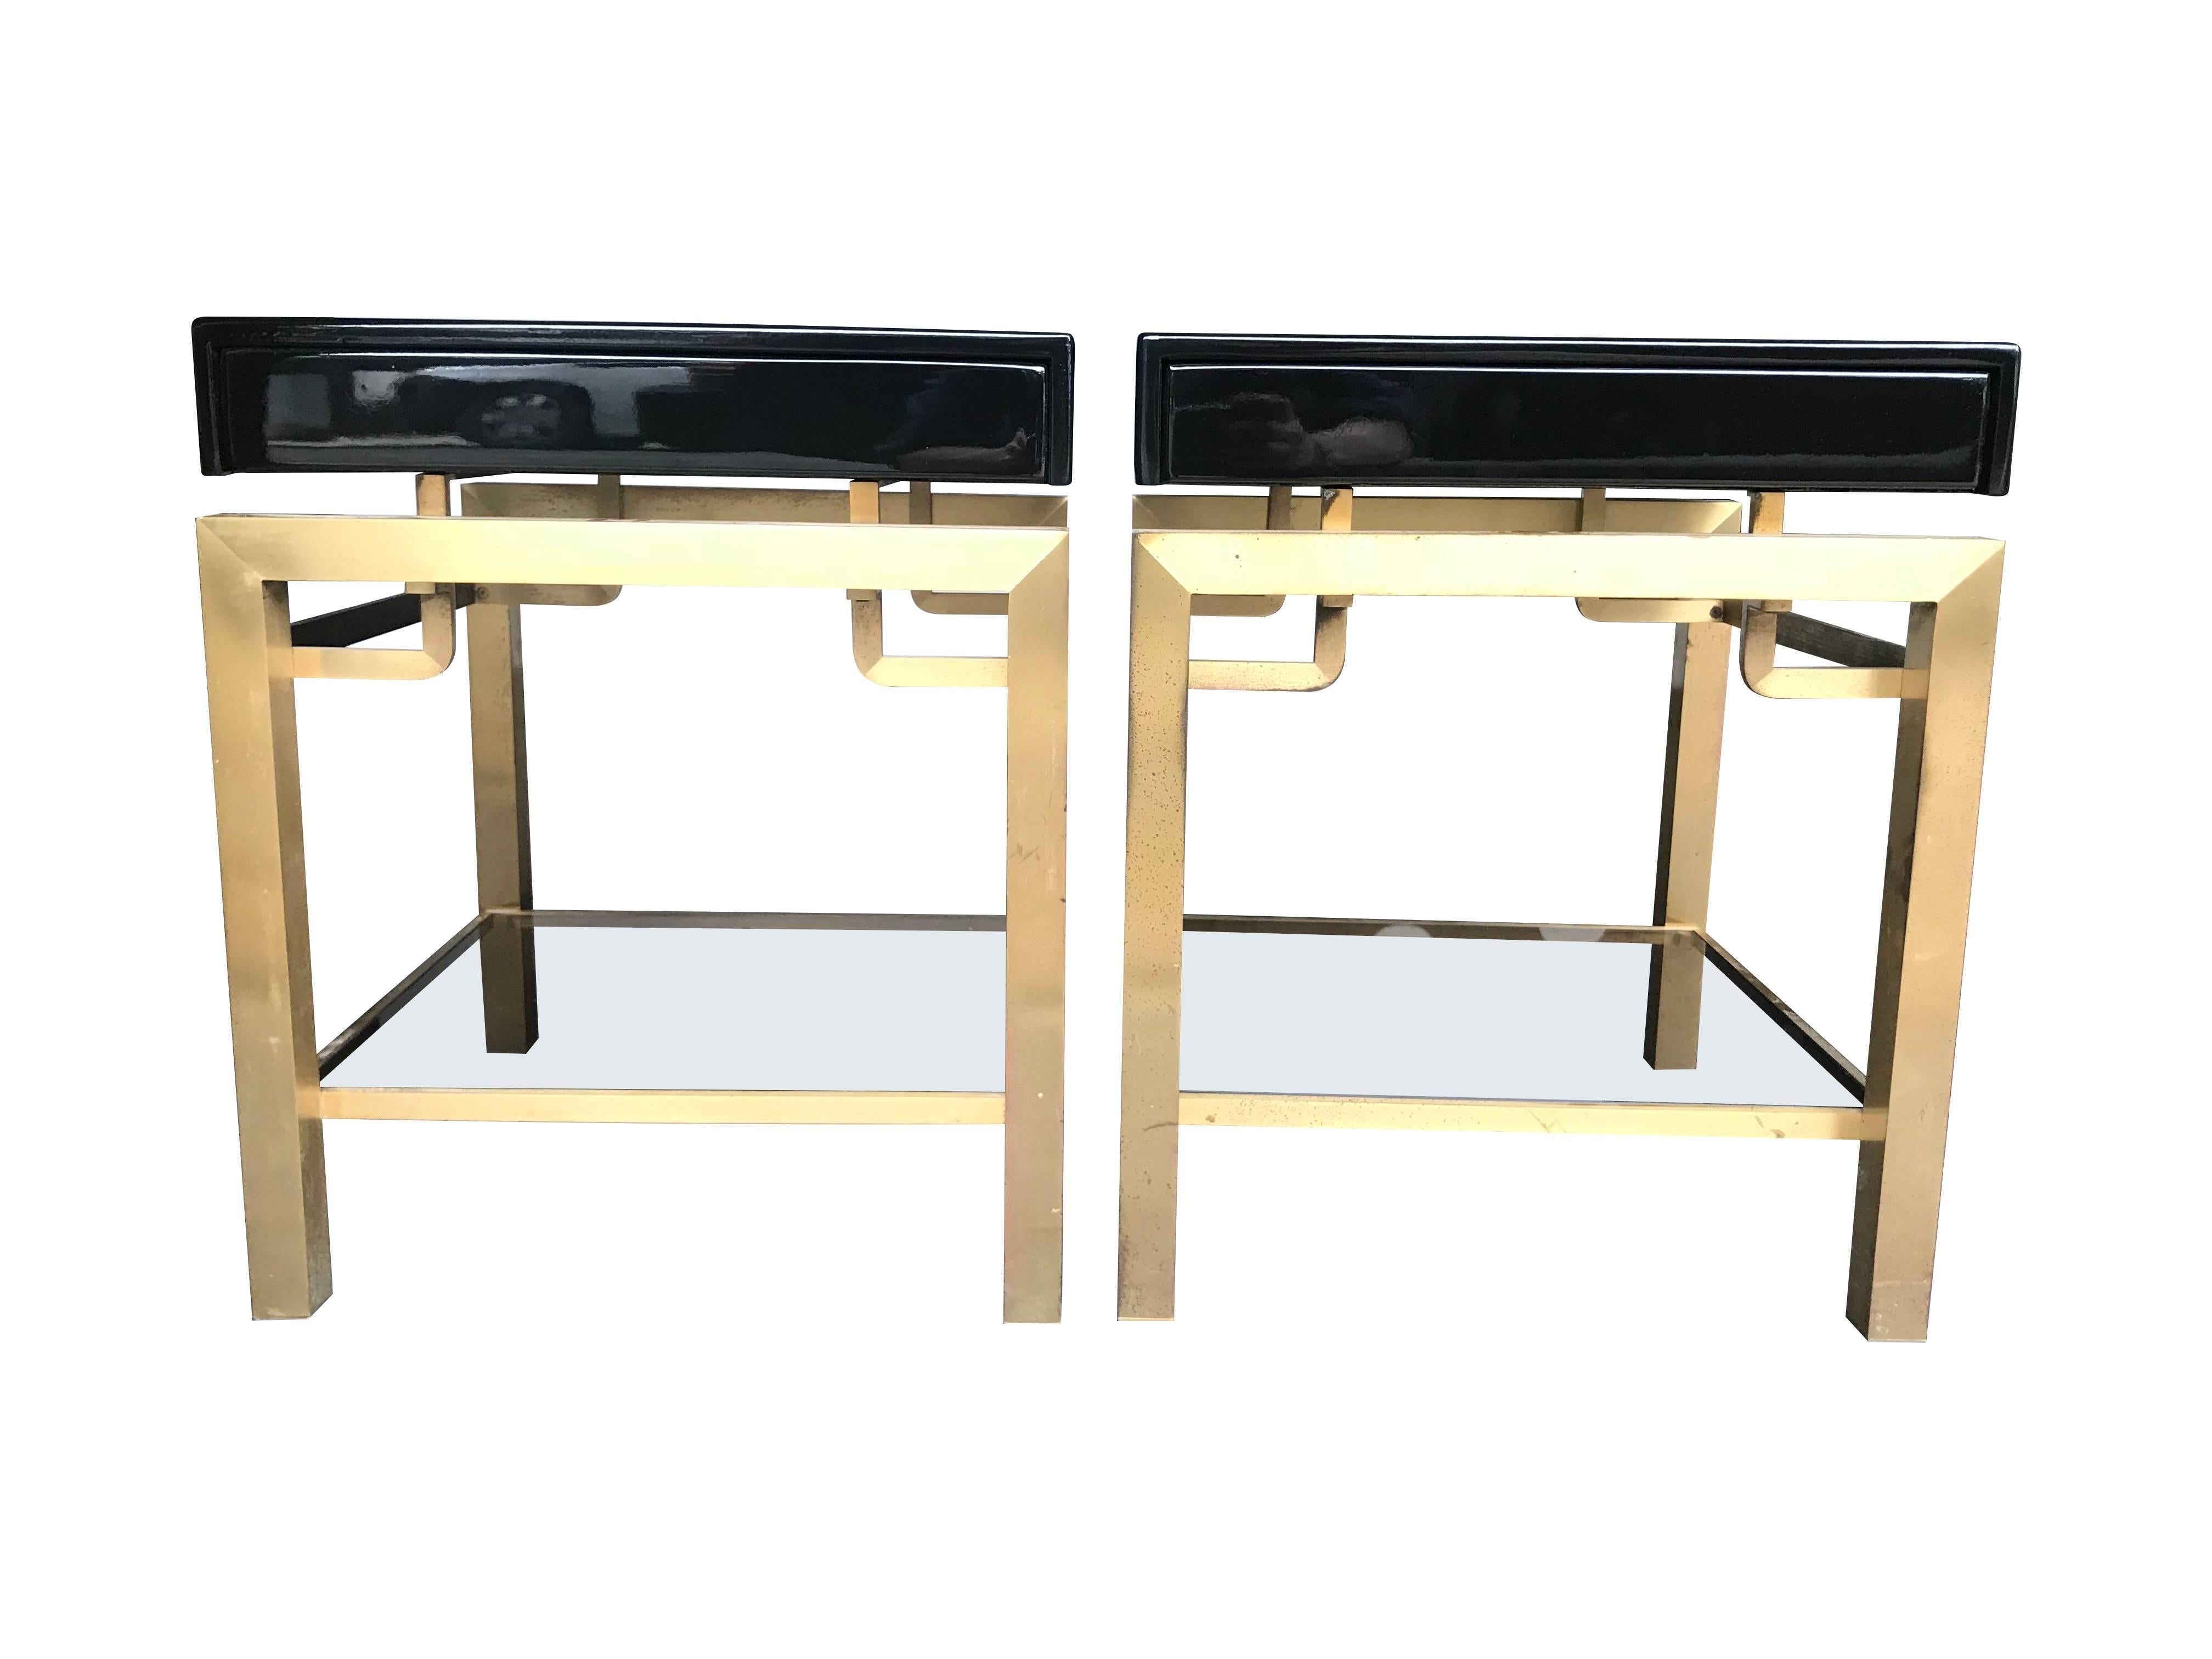 A stunning pair of Guy Lefevre designed side tables for Maison Jansen with gilt metal legs and black lacquer top, each with a single drawer.